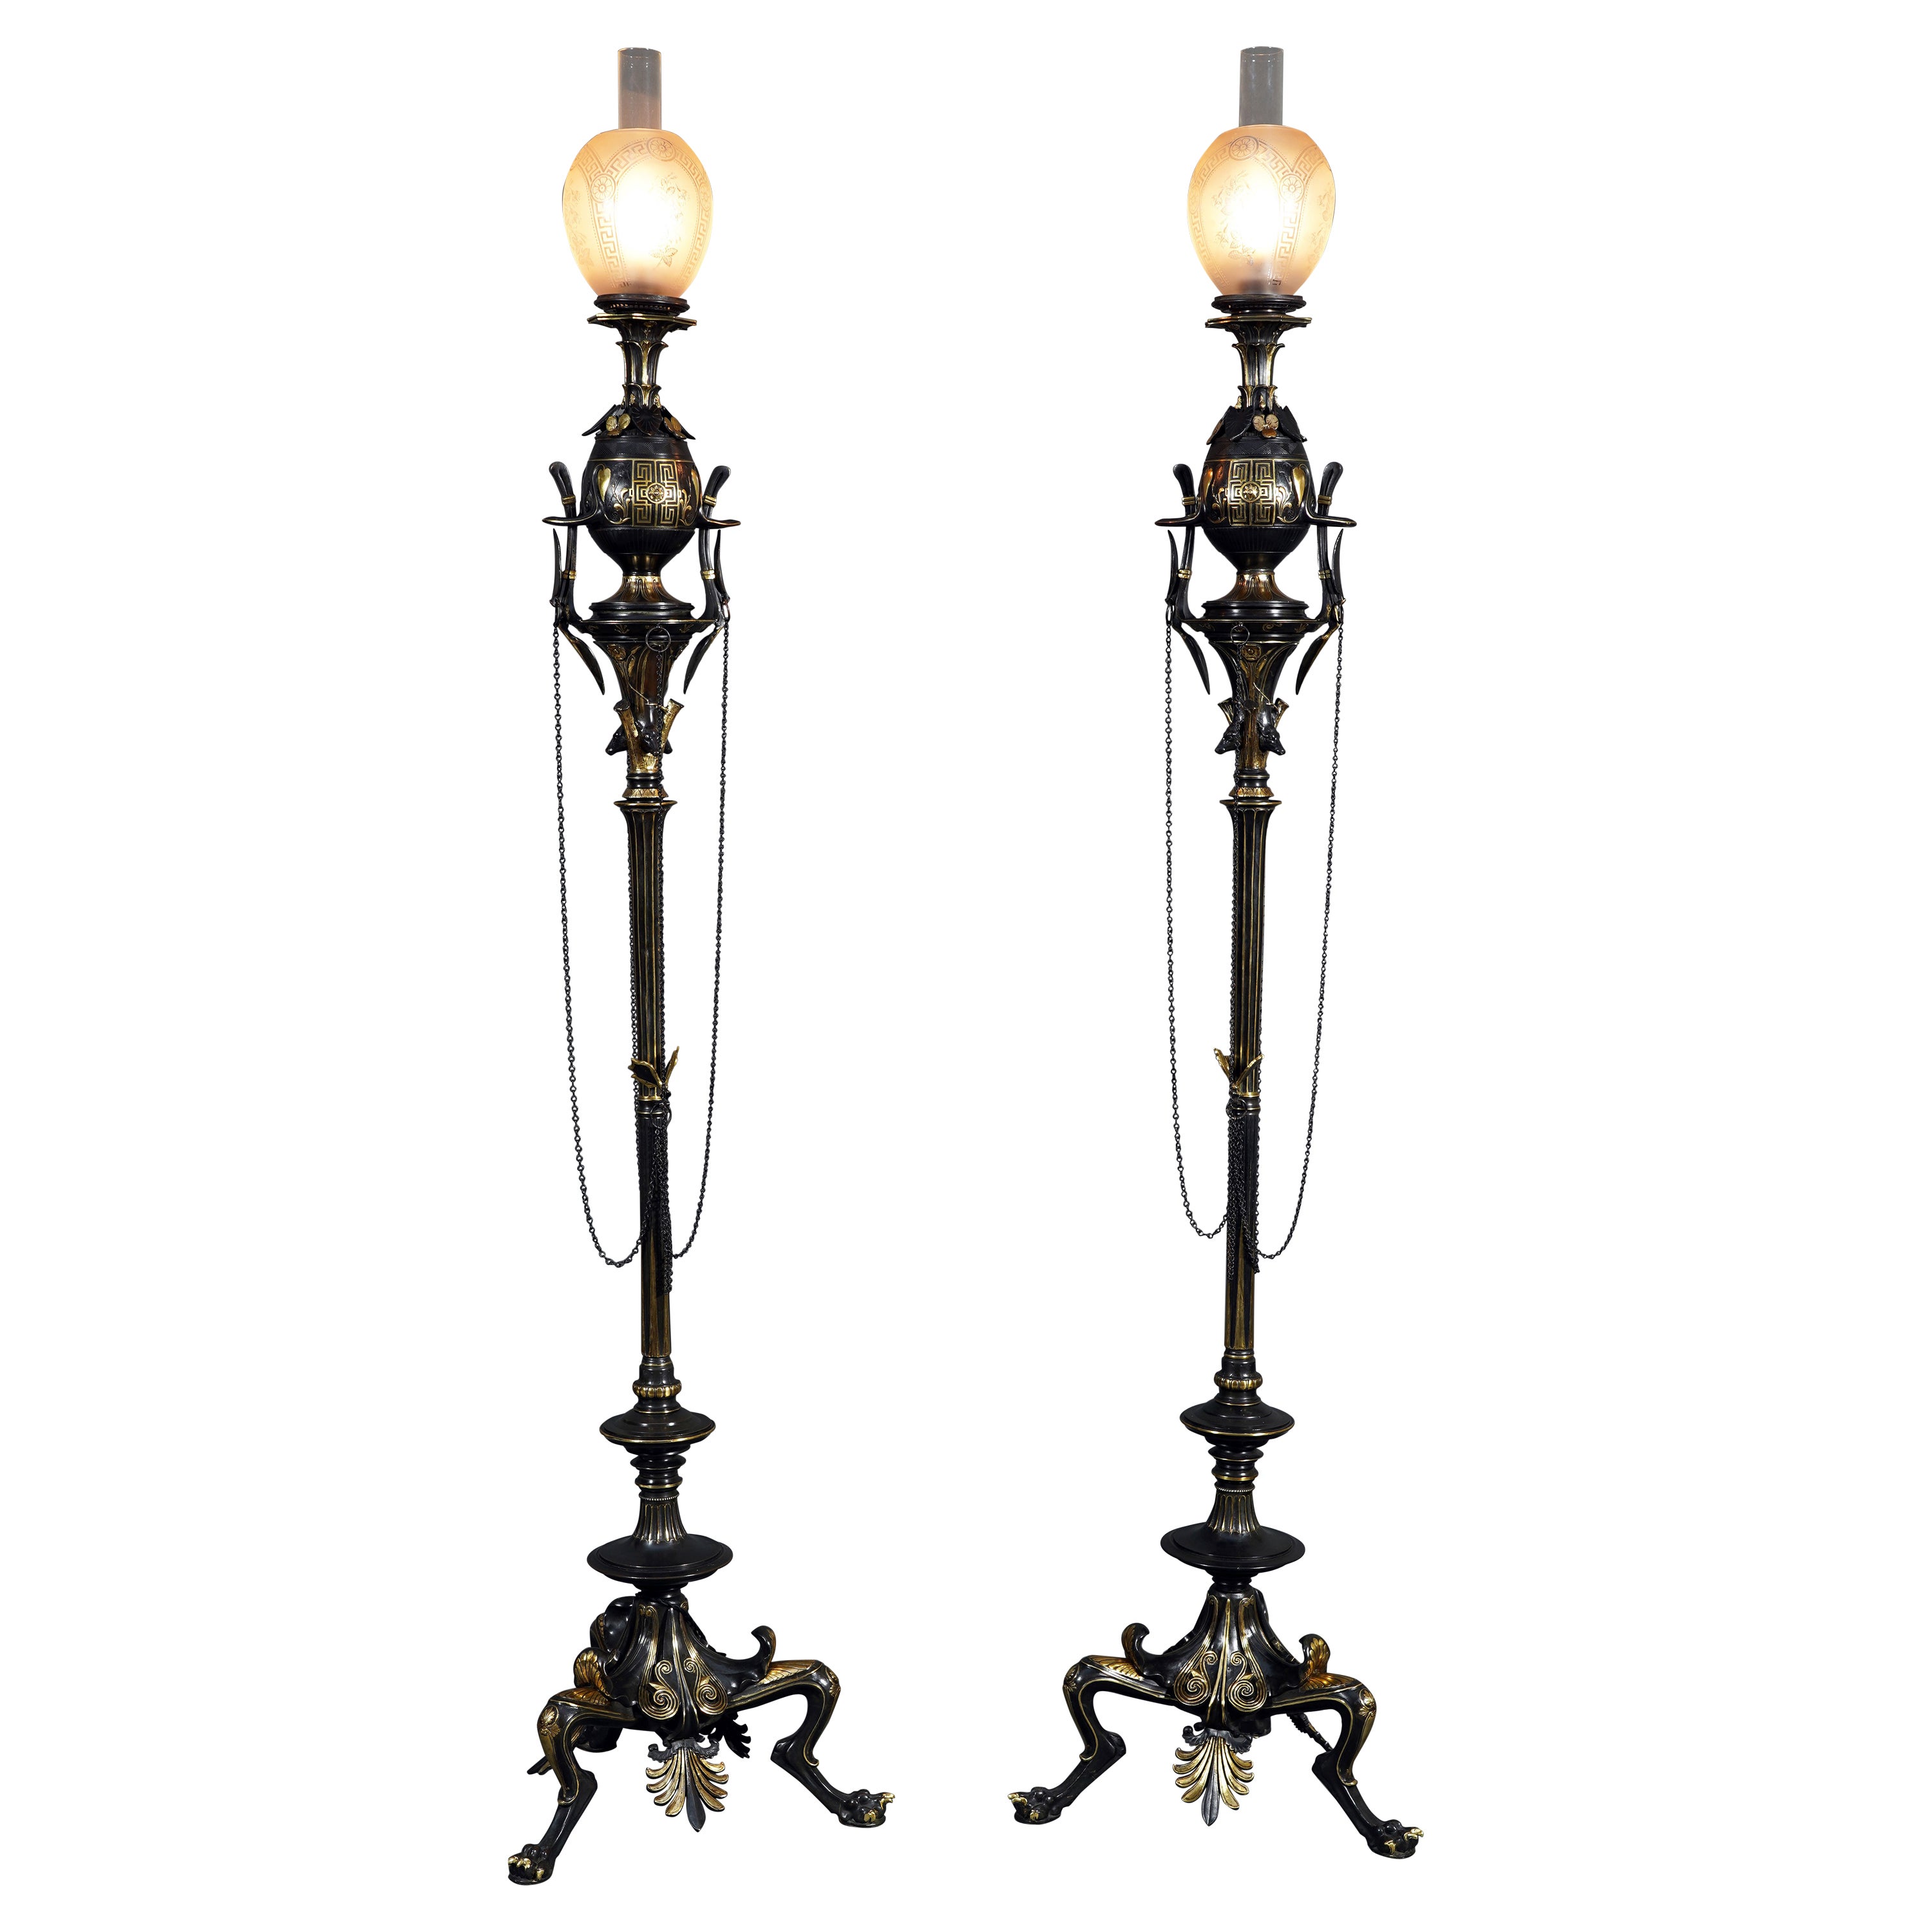 Pair of Neo-Greek Floor Lamps Attributed to G. Servant, France, Circa 1870 For Sale